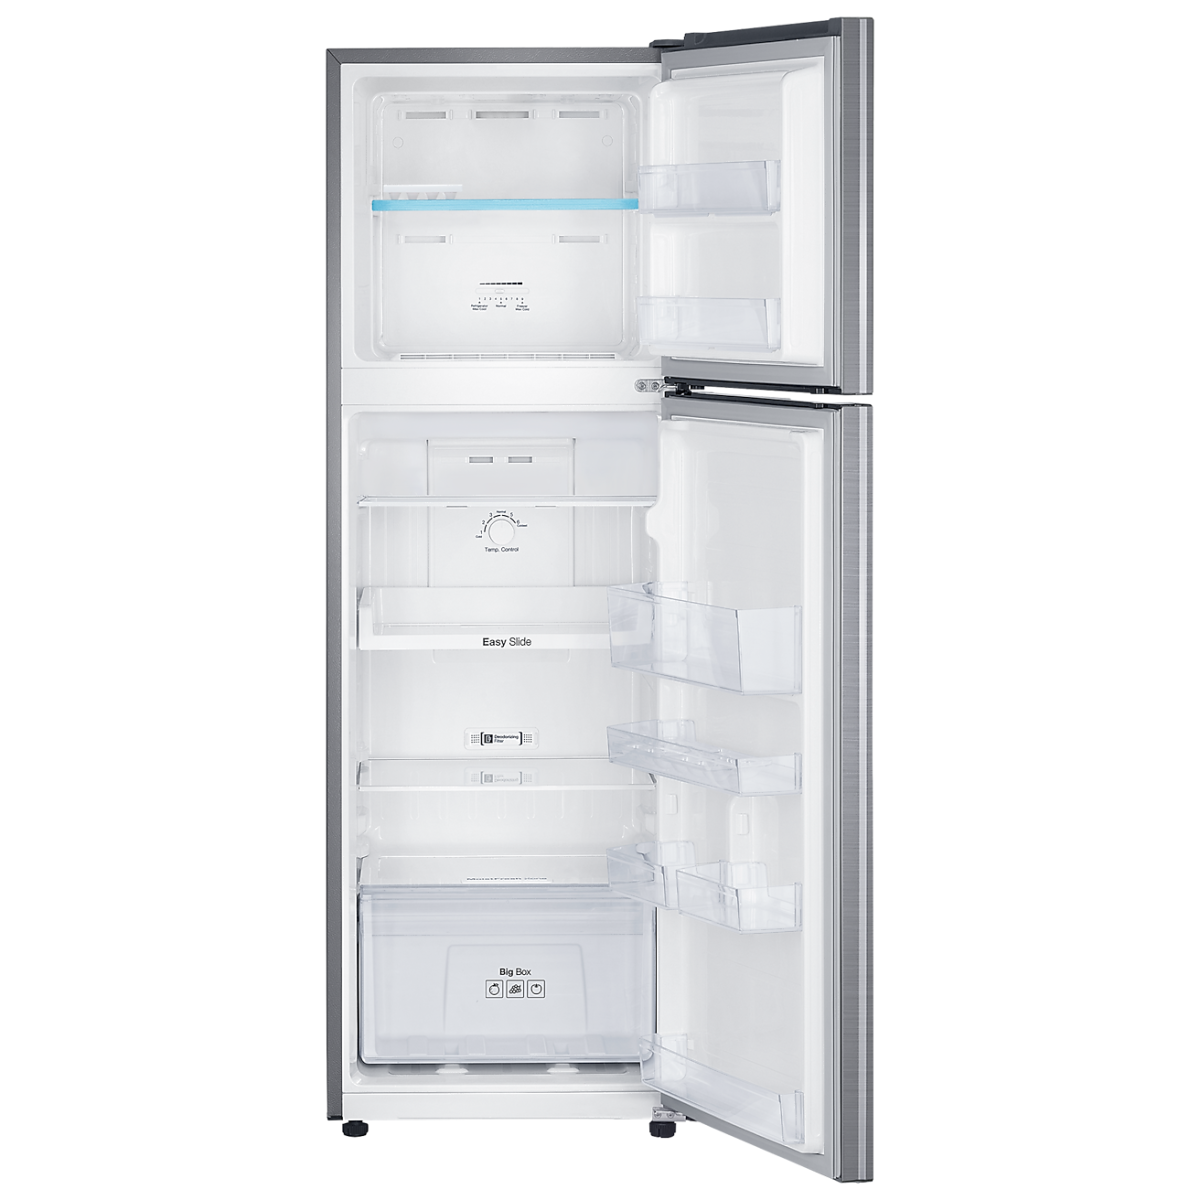 SAMSUNG 275 Liter Refrigerator Mono Cooling with Digital Inverter Technology RT29HAR9DS8/D3, Best Refrigerators of Year, Top-rated Refrigerators, Refrigerator Reviews, Refrigerator Comparison, Buying a Refrigerator Guide, Refrigerator Deals and Offers